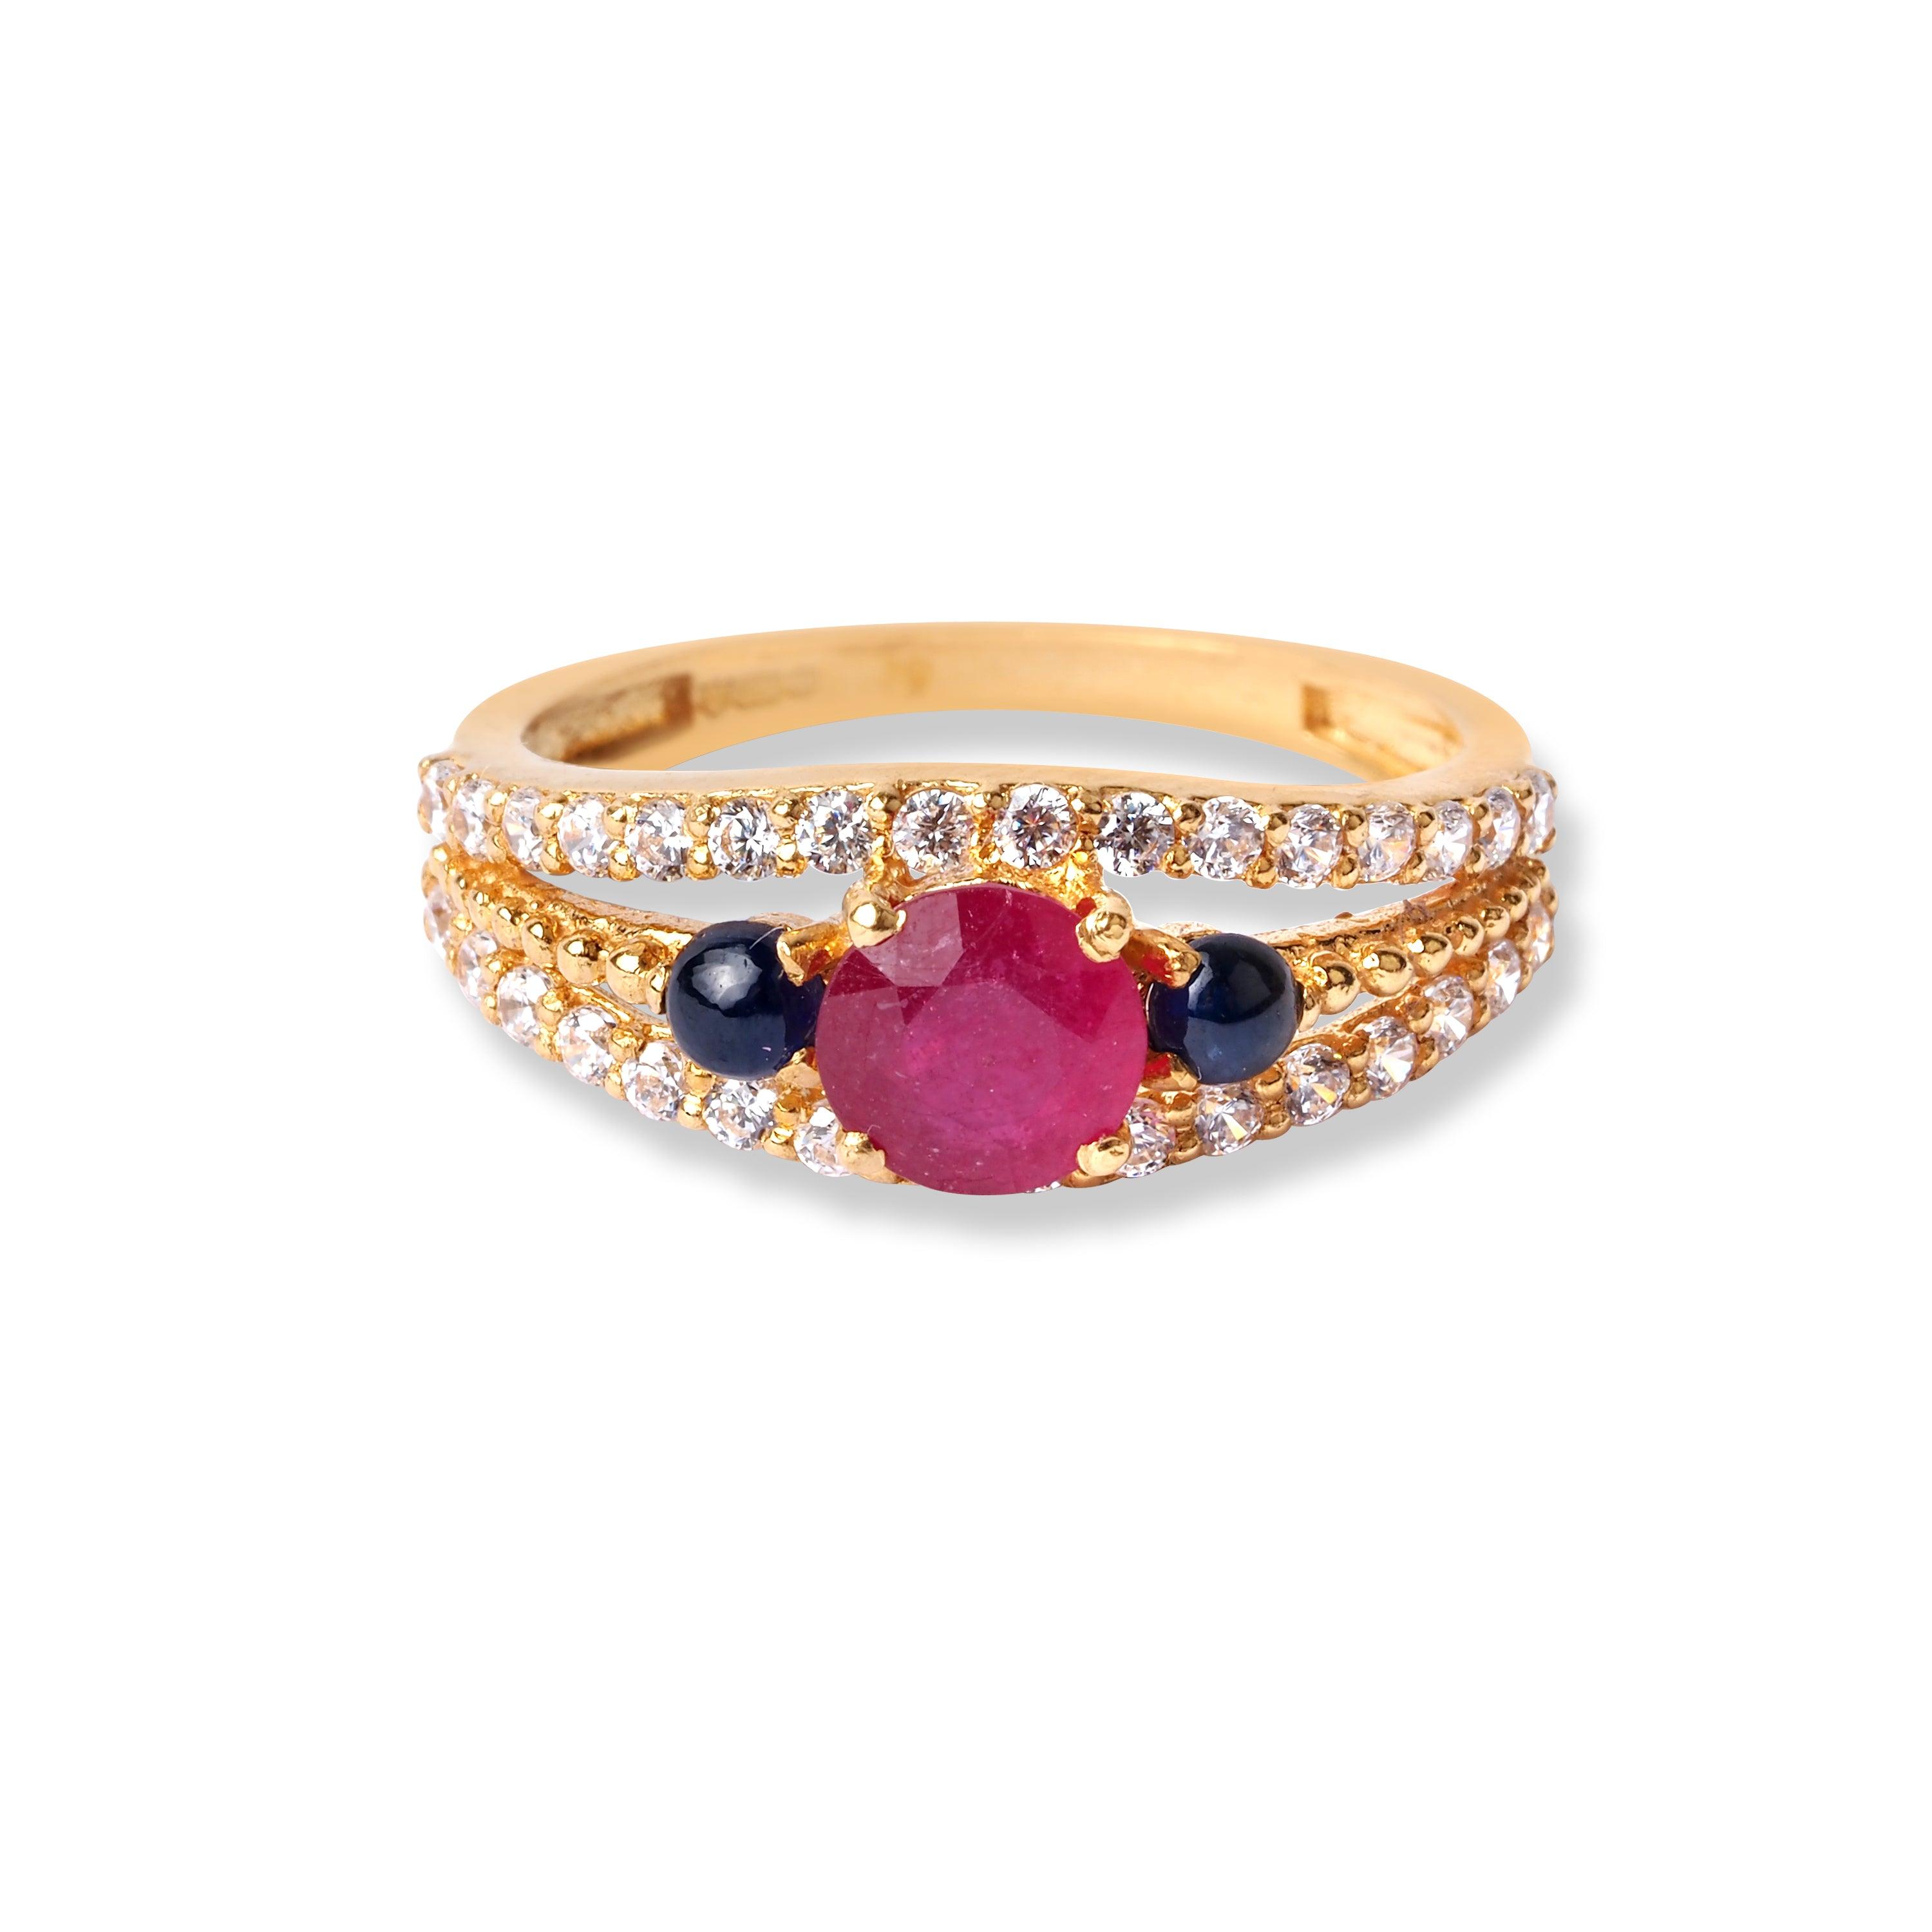 22ct Yellow Gold Ring with Pink, Navy & White Cubic Zirconia Stones (3.9g) LR-16585 - Minar Jewellers